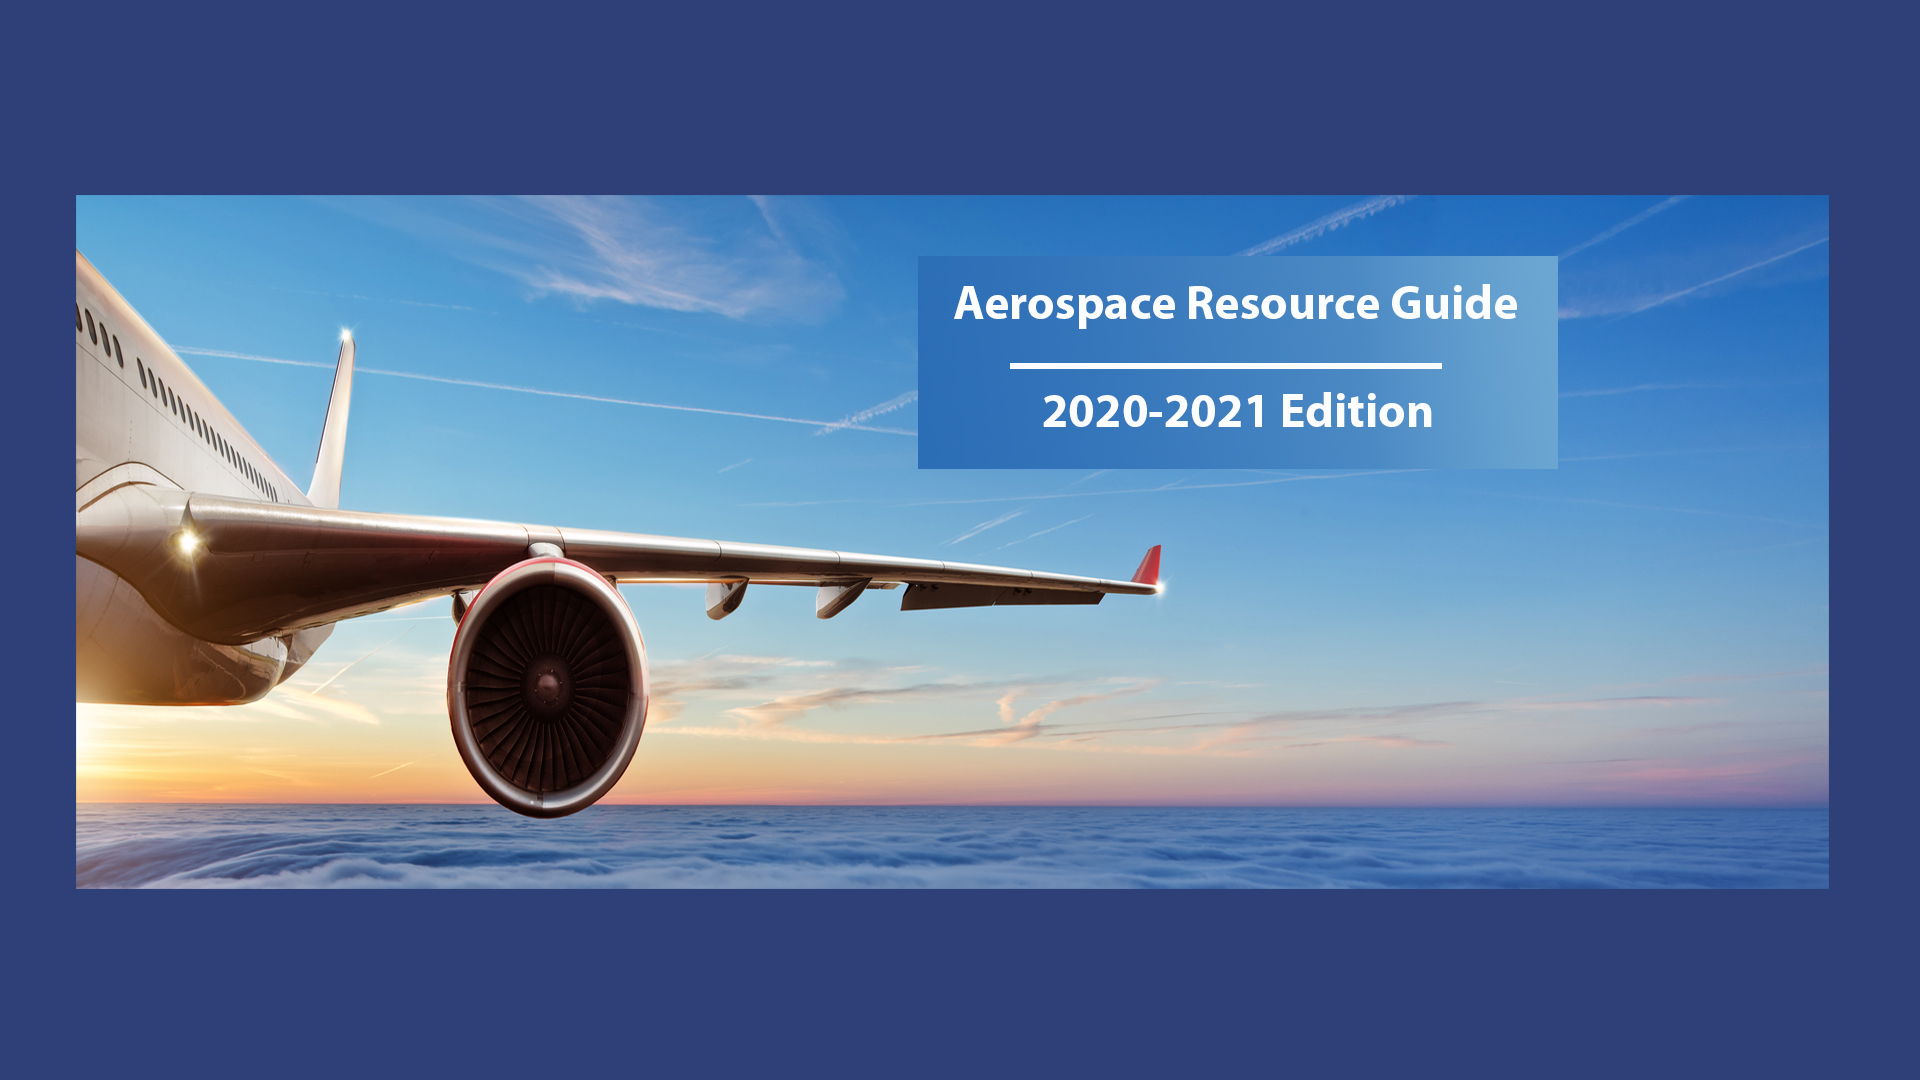 Image of civil aircraft flying with horizon in background and text for Aerospace Resource Guide